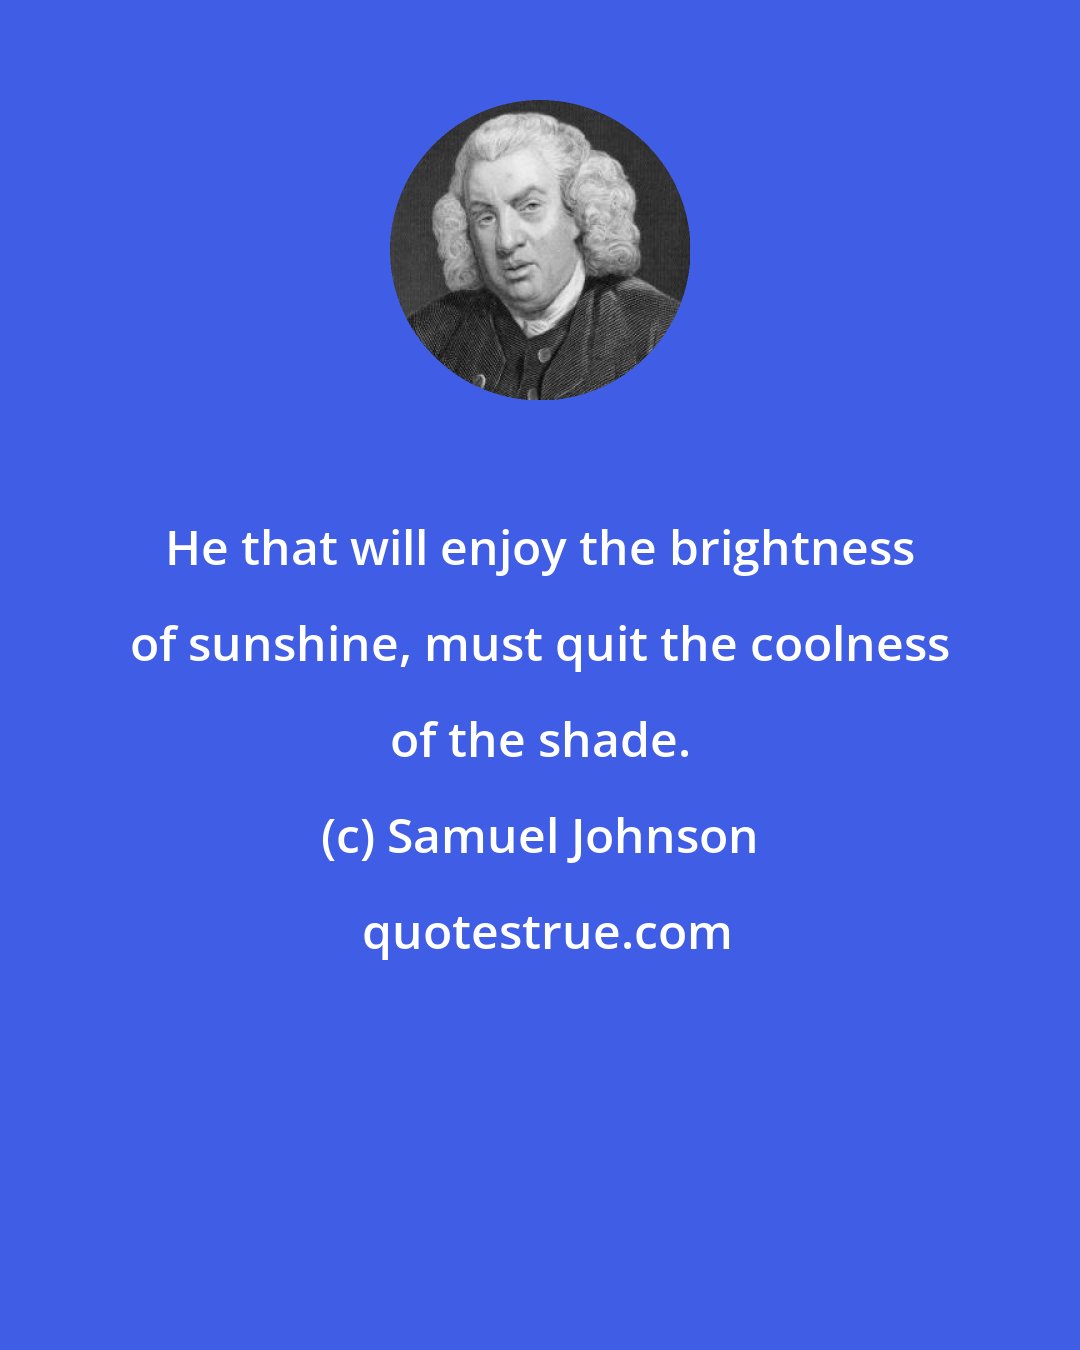 Samuel Johnson: He that will enjoy the brightness of sunshine, must quit the coolness of the shade.